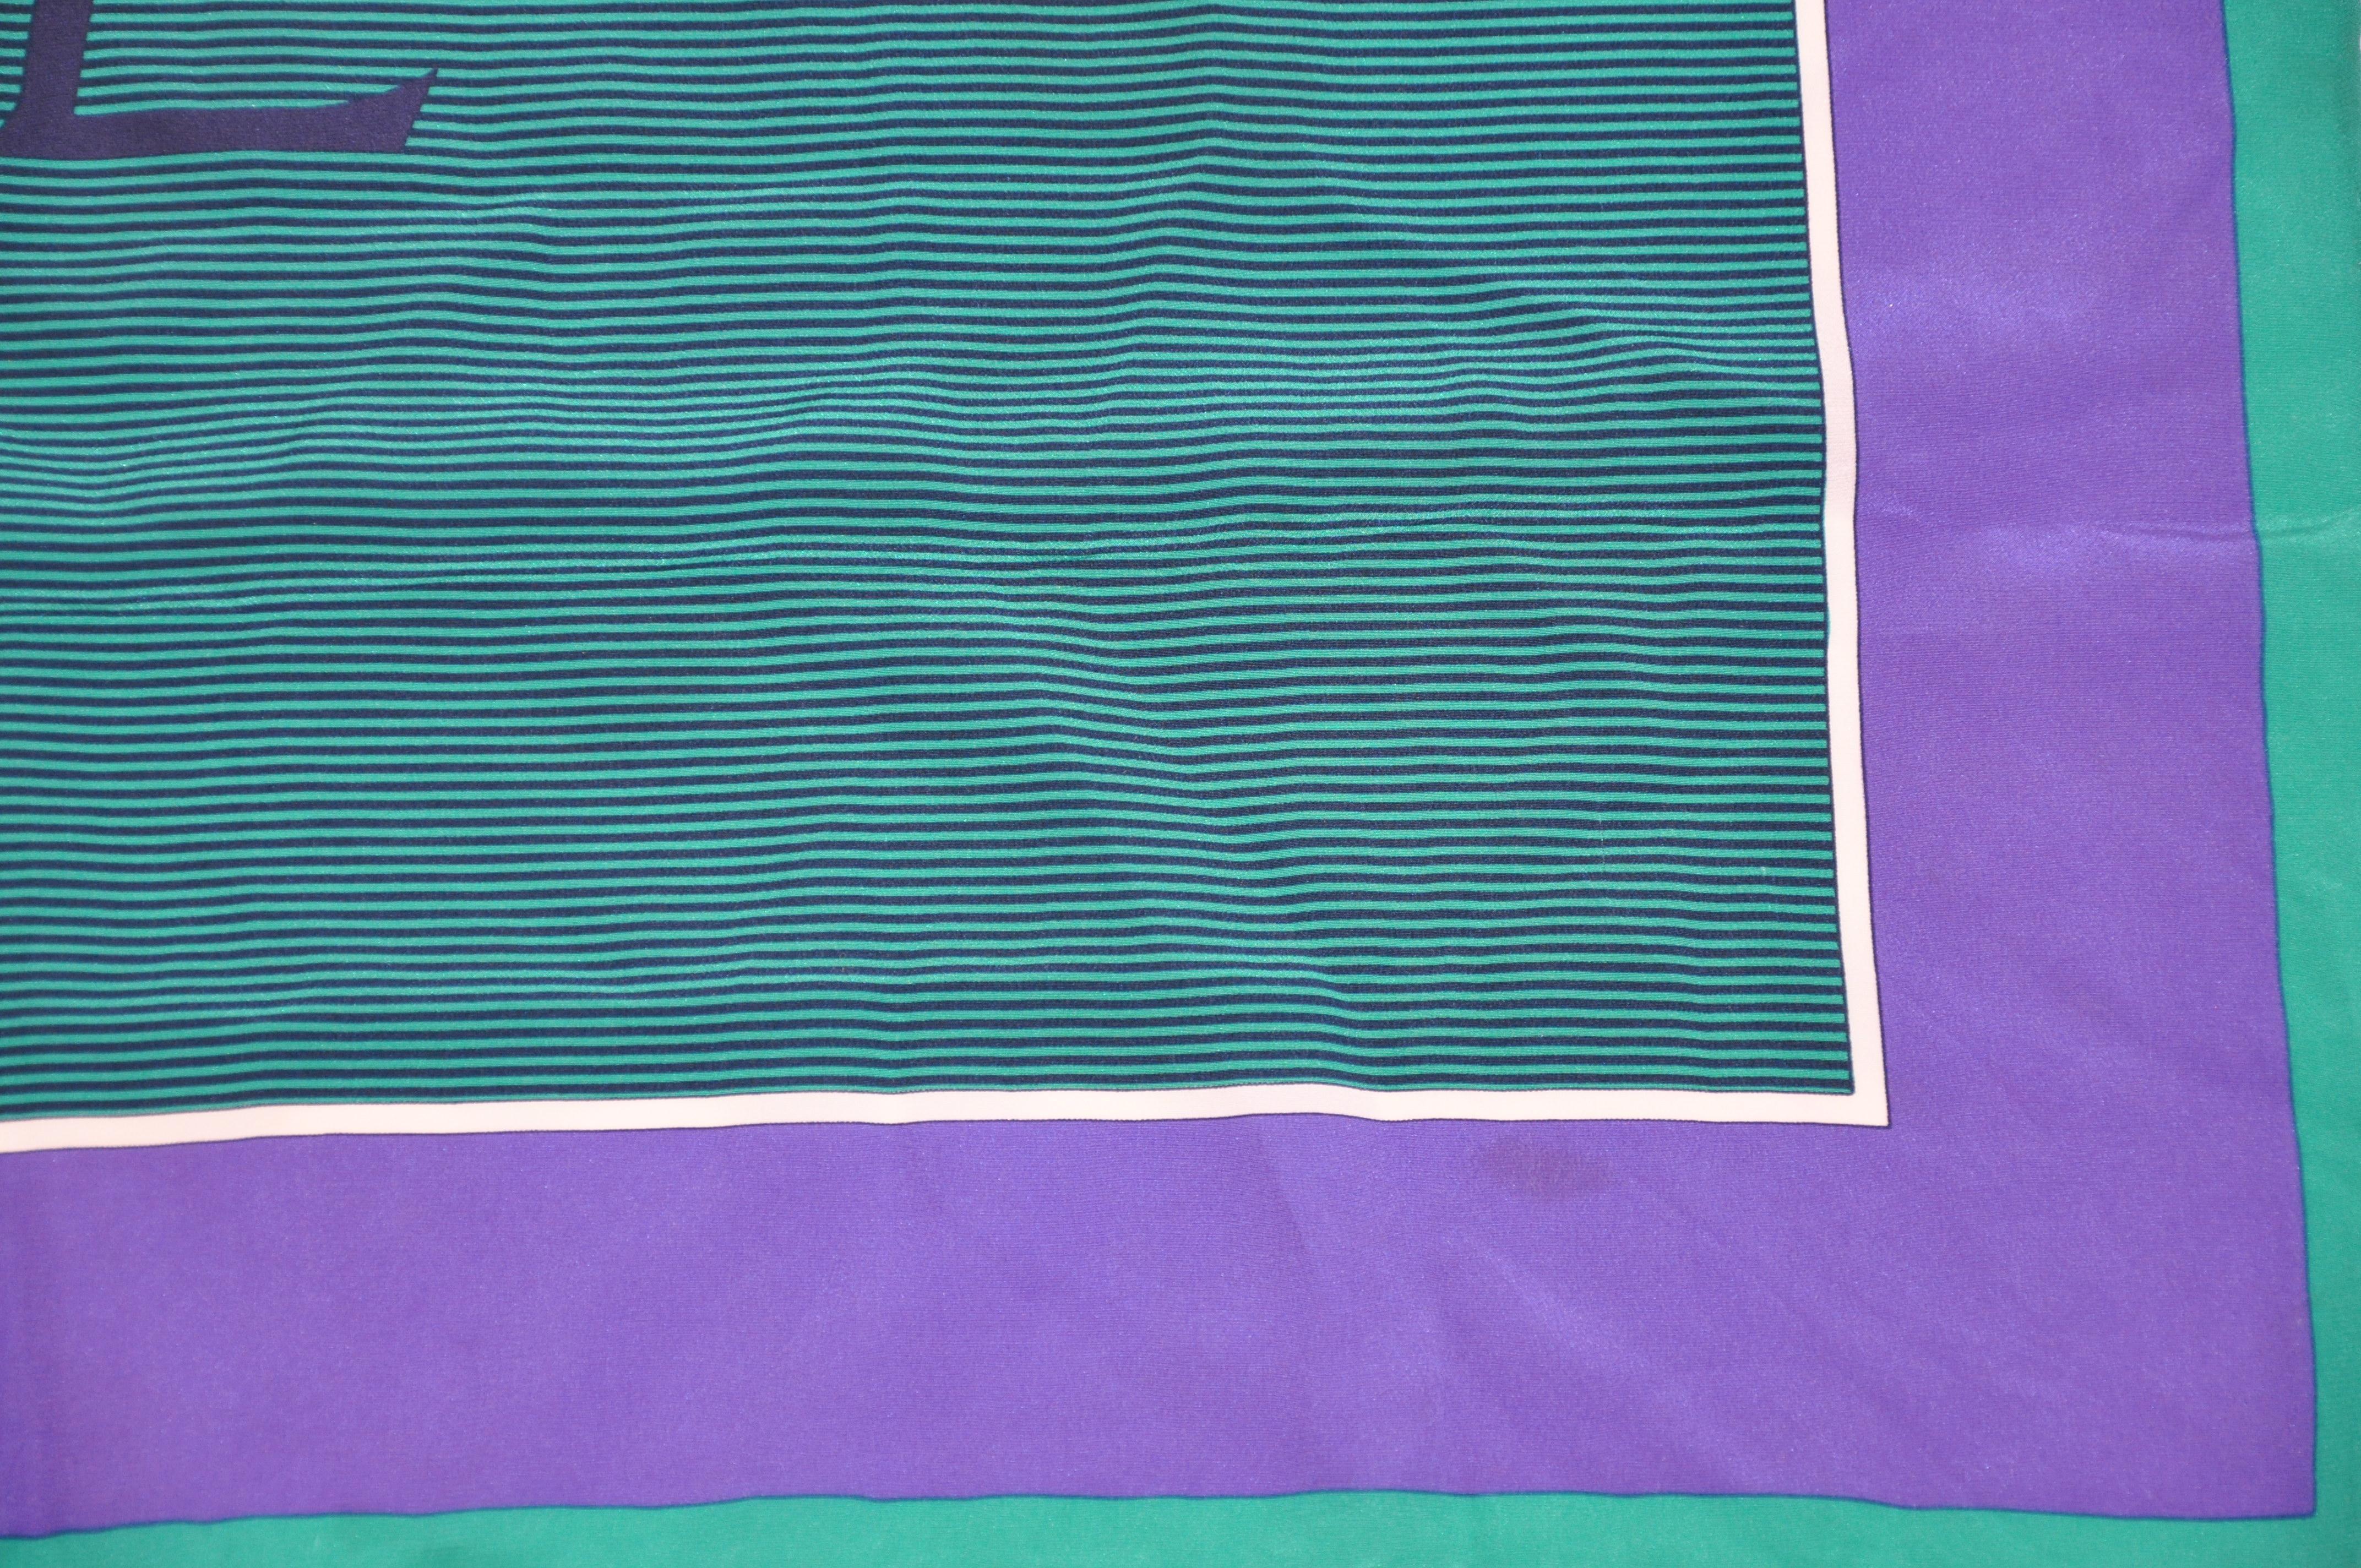 Yves Saint Laurent Deep Lavender & Green Border Silk Scarf In Good Condition For Sale In New York, NY